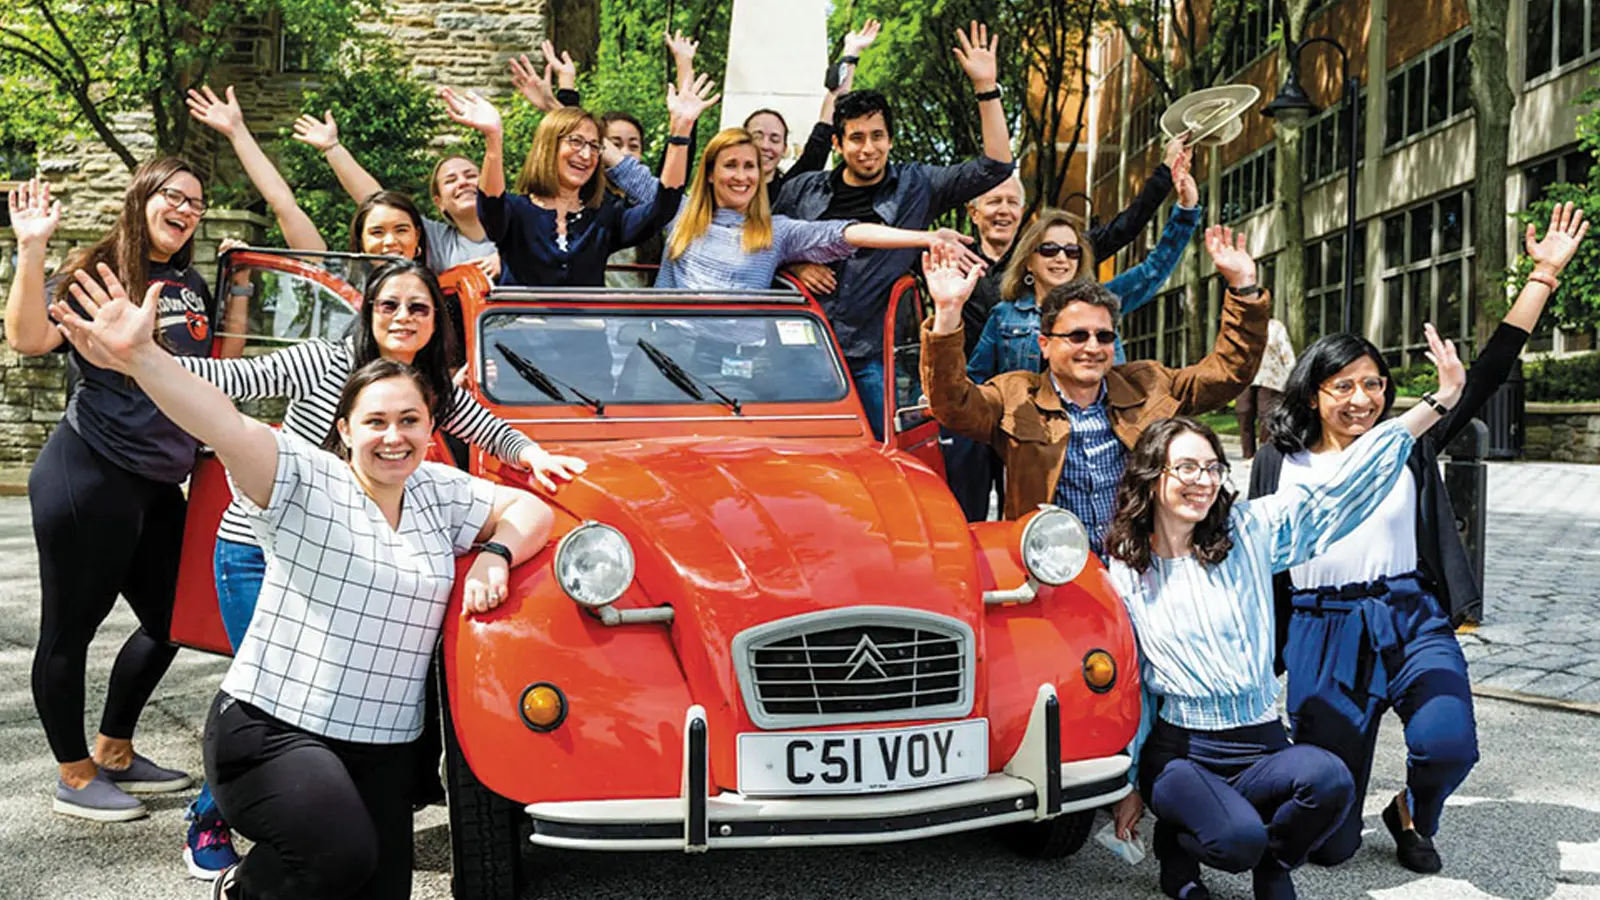 Graduate and medical students smile in front of a vintage car in front of PCOM's Philadelphia campus buildings